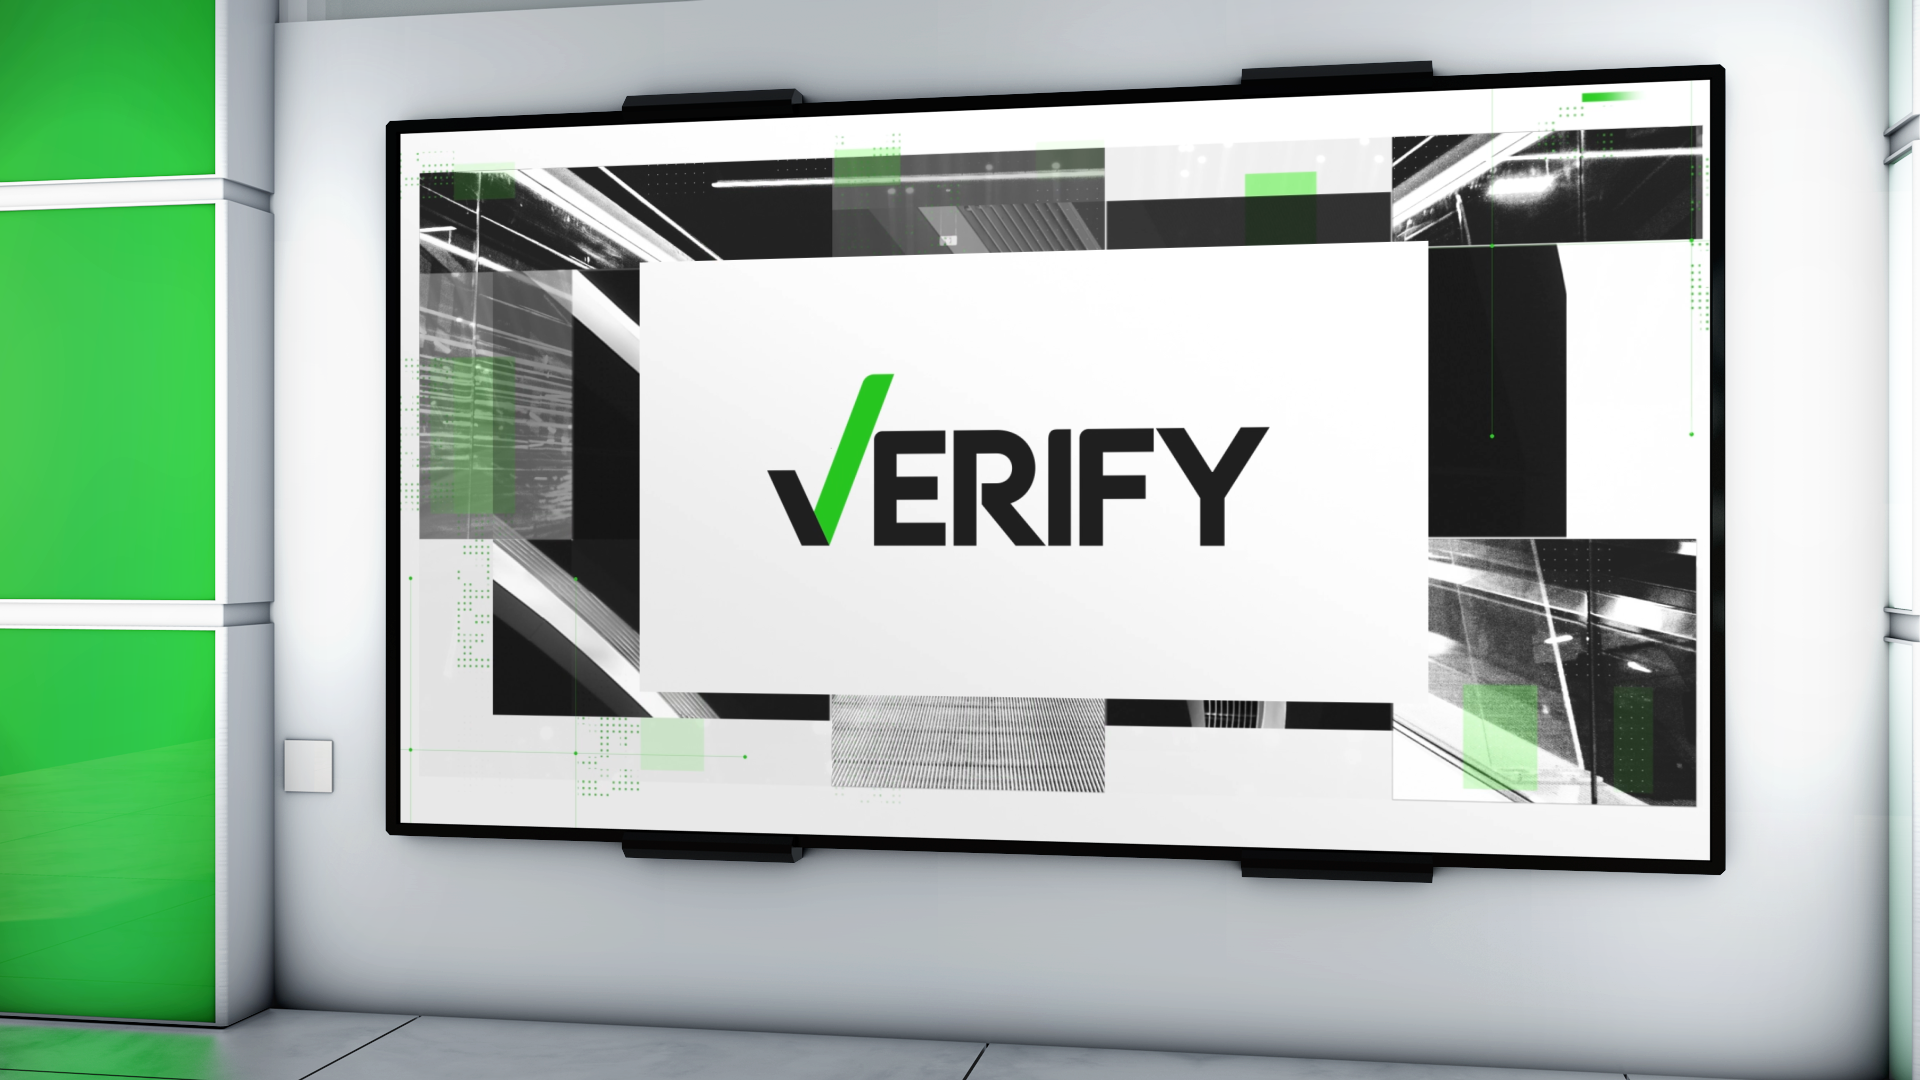 See something on social media that you need verified? Our VERIFY team is here to help.